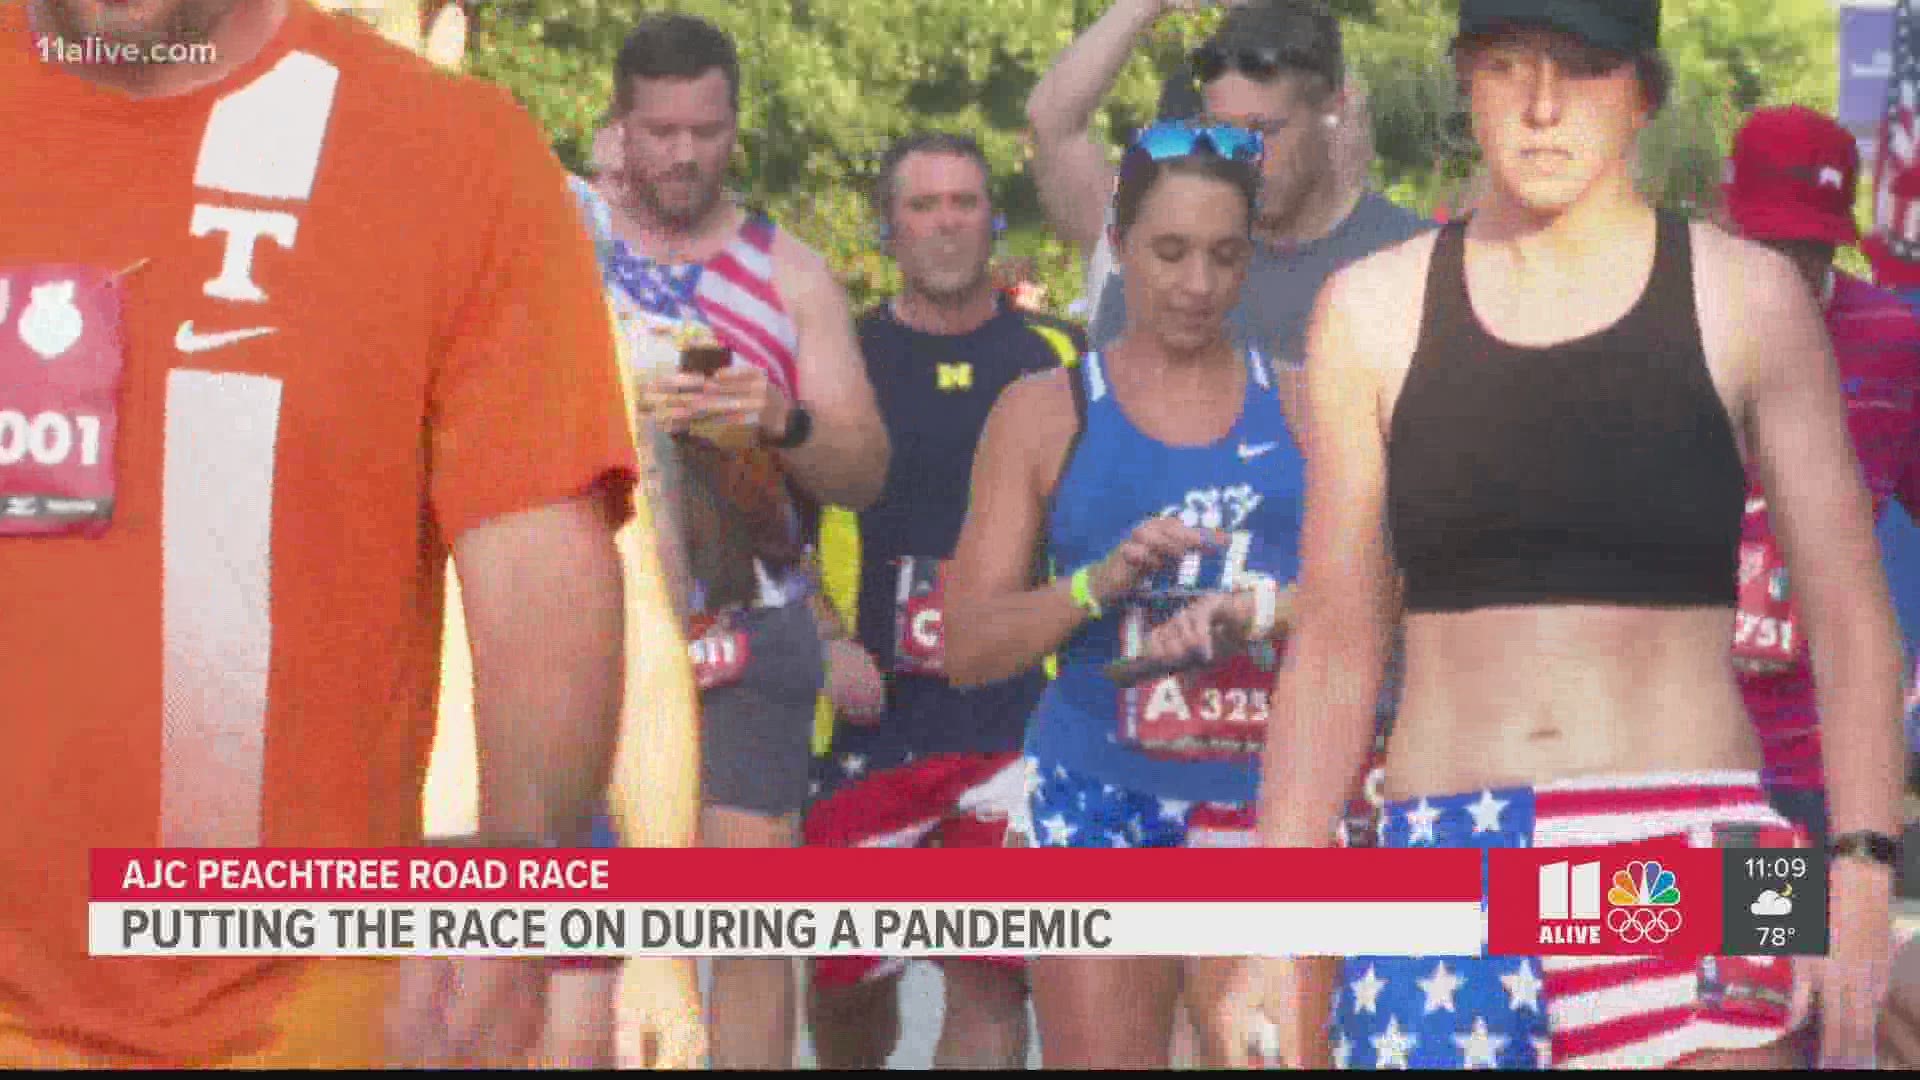 A long-lost friend is back looking slightly different…but still beloved. The AJC Peachtree Road Race has returned to the 4th of July.